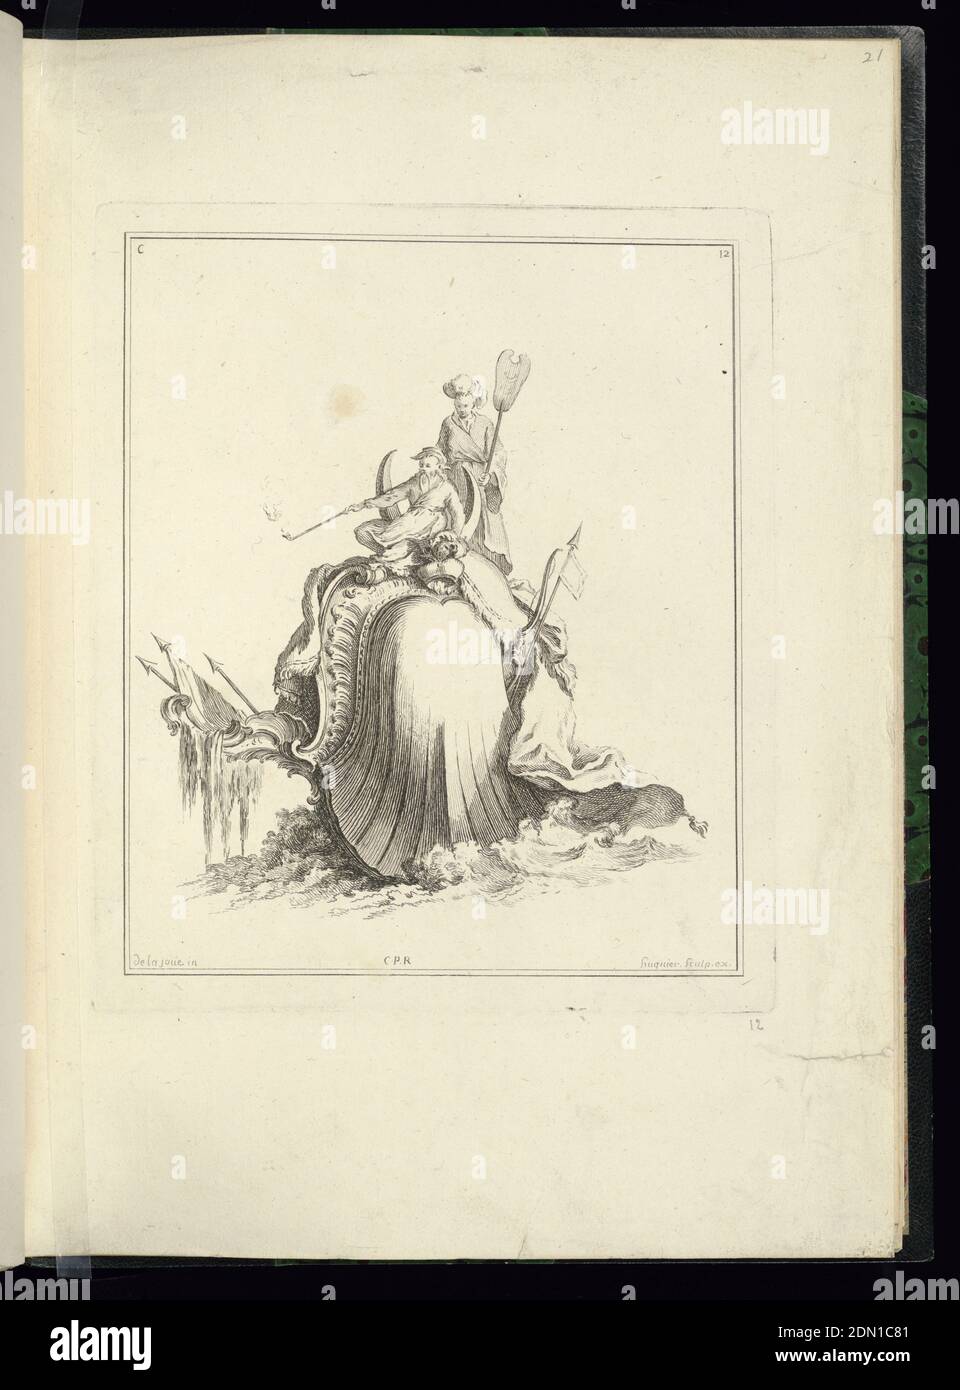 Design for a Cartouche Representing the Country of China, Jacques de Lajoüe, French, 1687–1761, Gabriel Huquier, French, 1695–1772, Engraving on white laid paper, Cartouche composed of a shell in reverse. Perched atop the shell, a Chinese woman holding a paddle and a Chinese man framed by animal horns and holding a long-handled pipe. A bow and arrow at right. The arrangement humorously refers to a lumbering, slow-moving 'dromedary,' or the lack of progress of China in comparison to France., France, 1740, ornament, Print Stock Photo